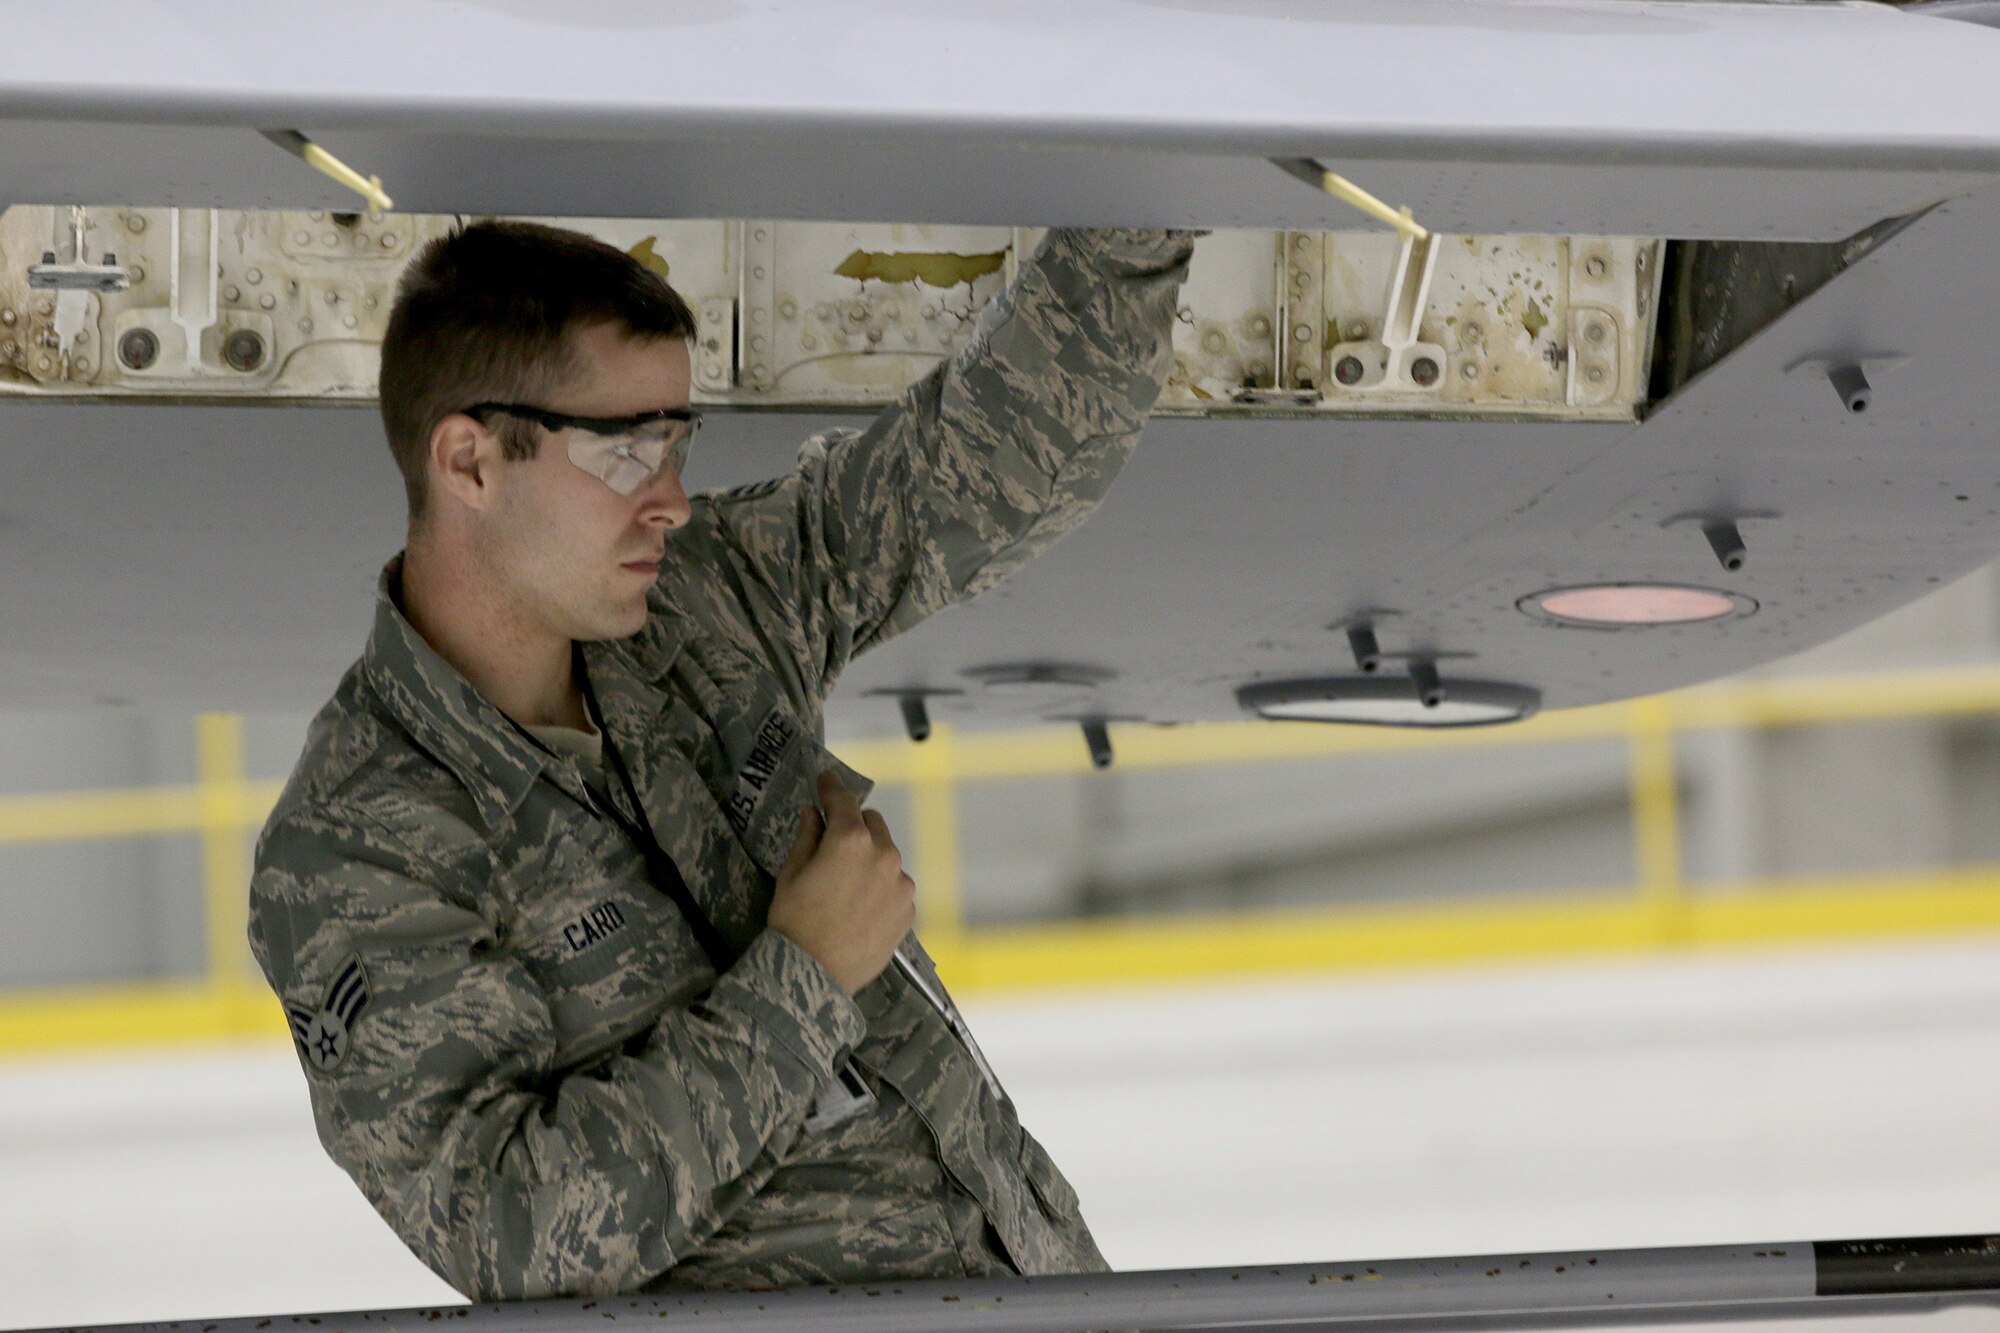 WRIGHT-PATTERSON AIR FORCE BASE, Ohio – Senior Airman Matthew Card, 445th Aircraft Maintenance Squadron crew chief, works on structural repairs on a flight control panel of a 445th Airlift Wing C-17 Globemaster III Oct. 14, 2015. (U.S. Air Force photo/Tech. Sgt. Patrick O’Reilly)